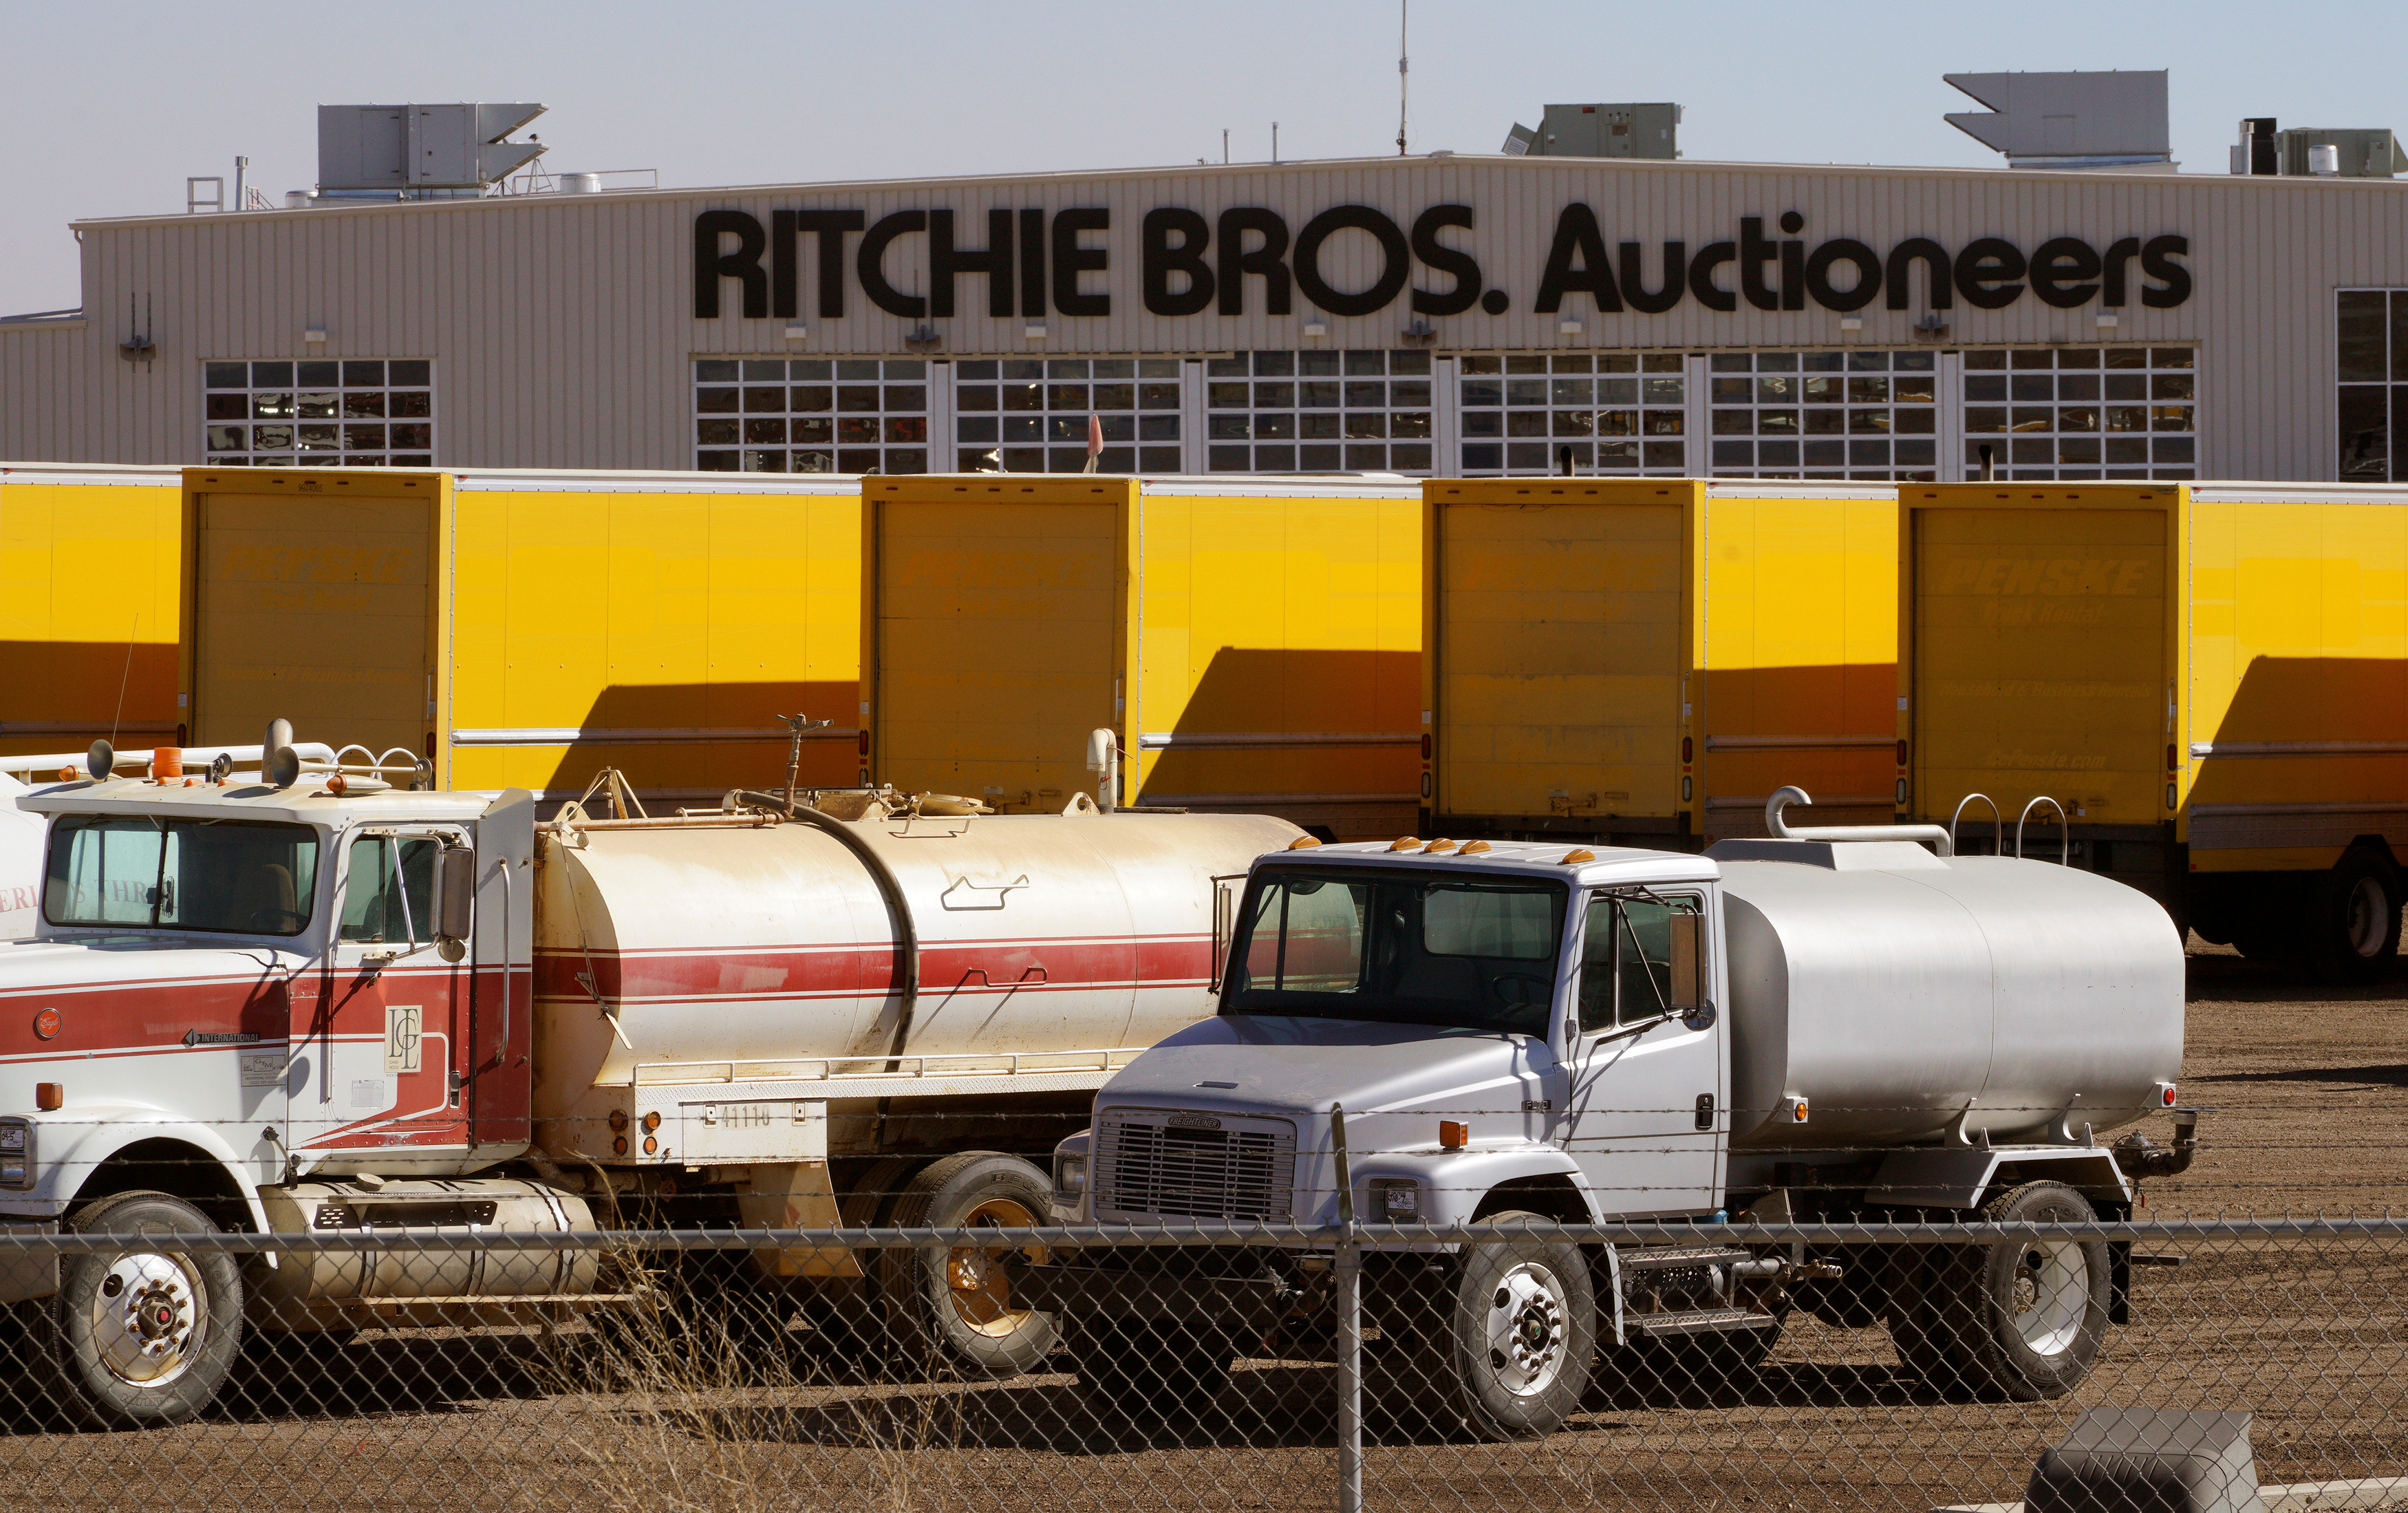 Vehicles to be sold in the next auction are lined up outside Ritchie Bros. Auctioneers in Longmont